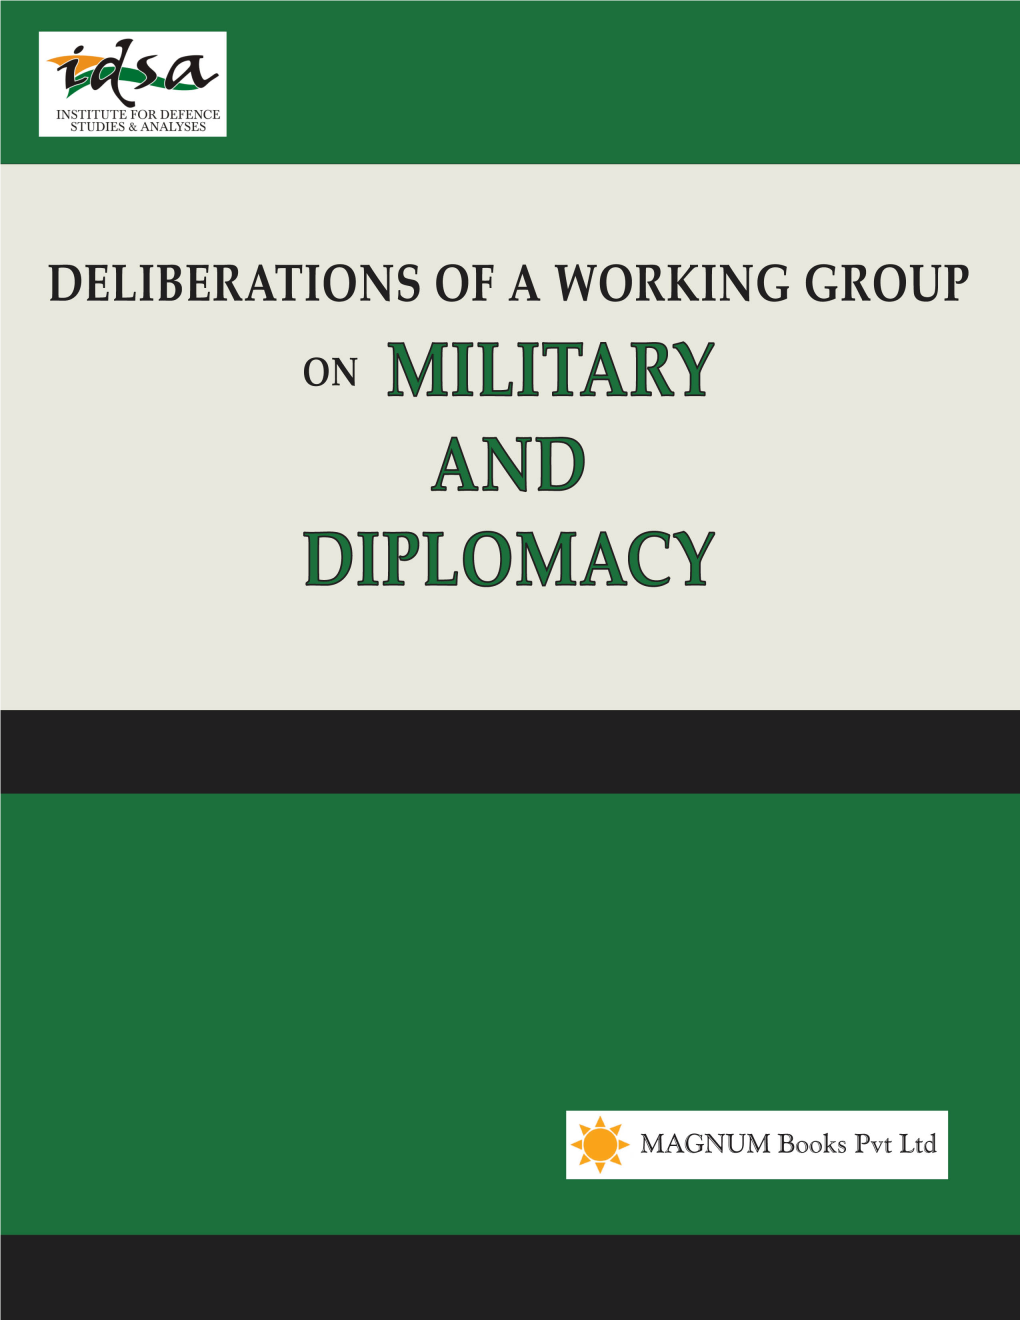 Deliberations of a Working Group on Military and Diplomacy Copyright © Institute for Defence Studies and Analyses, 2013